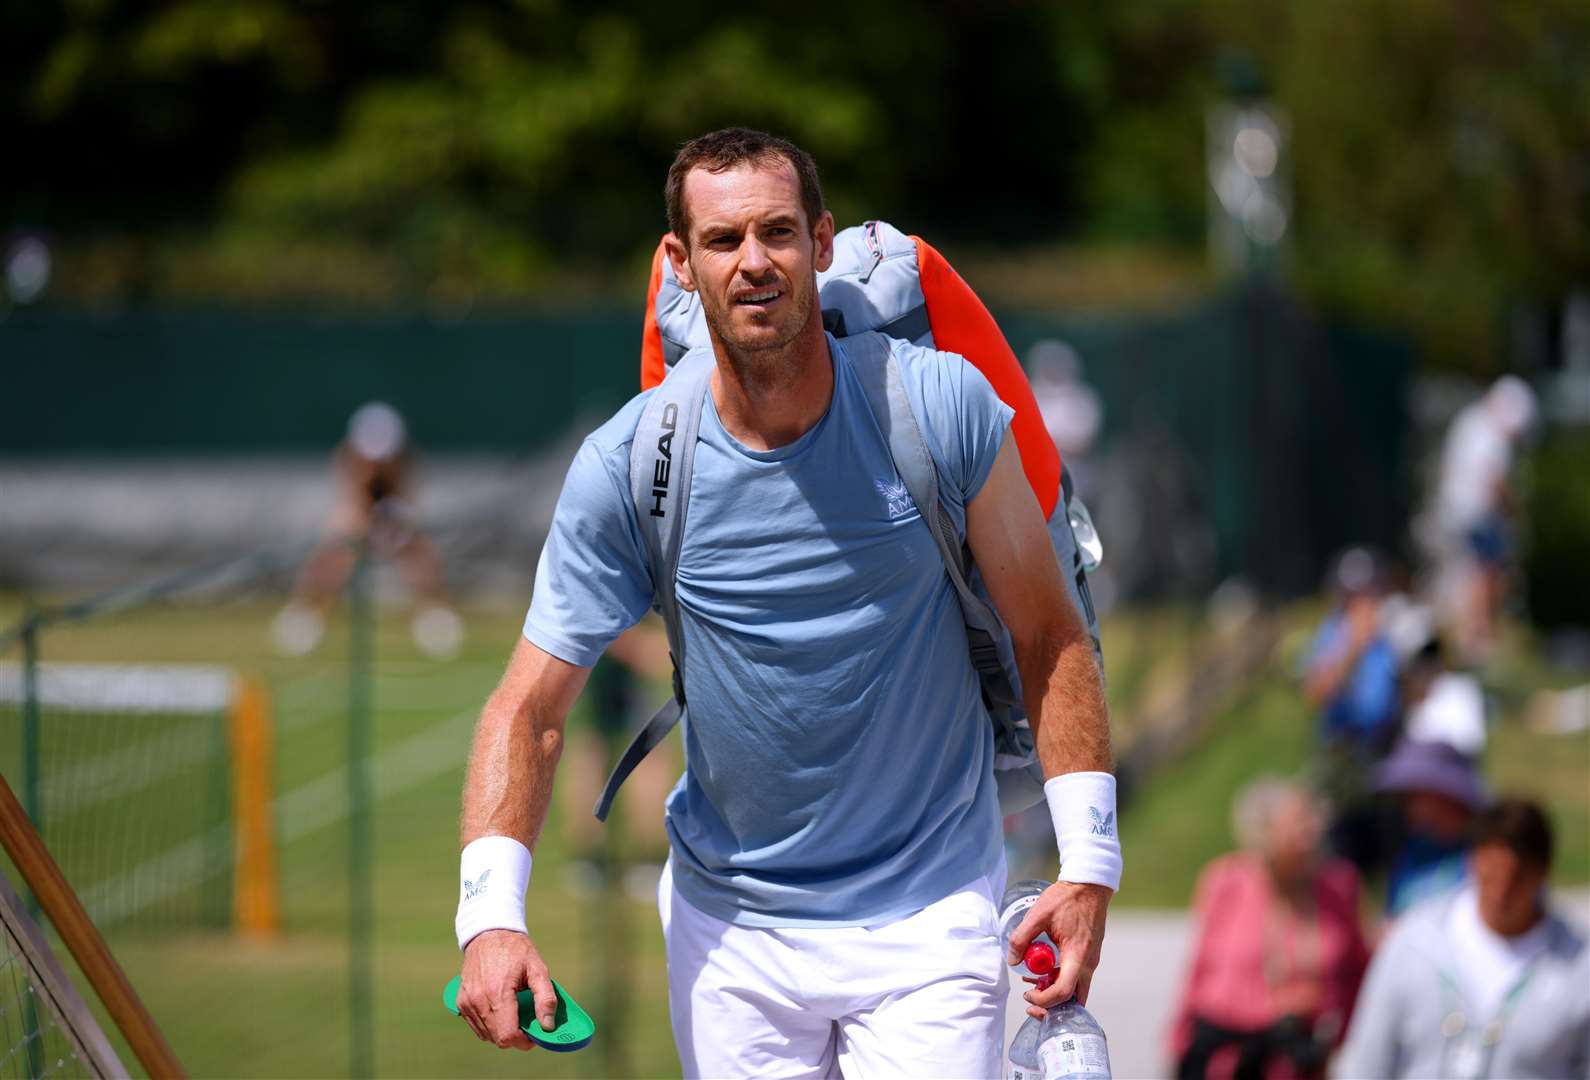 Sir Andy Murray returns from a practice session ahead of Wimbledon (PA)